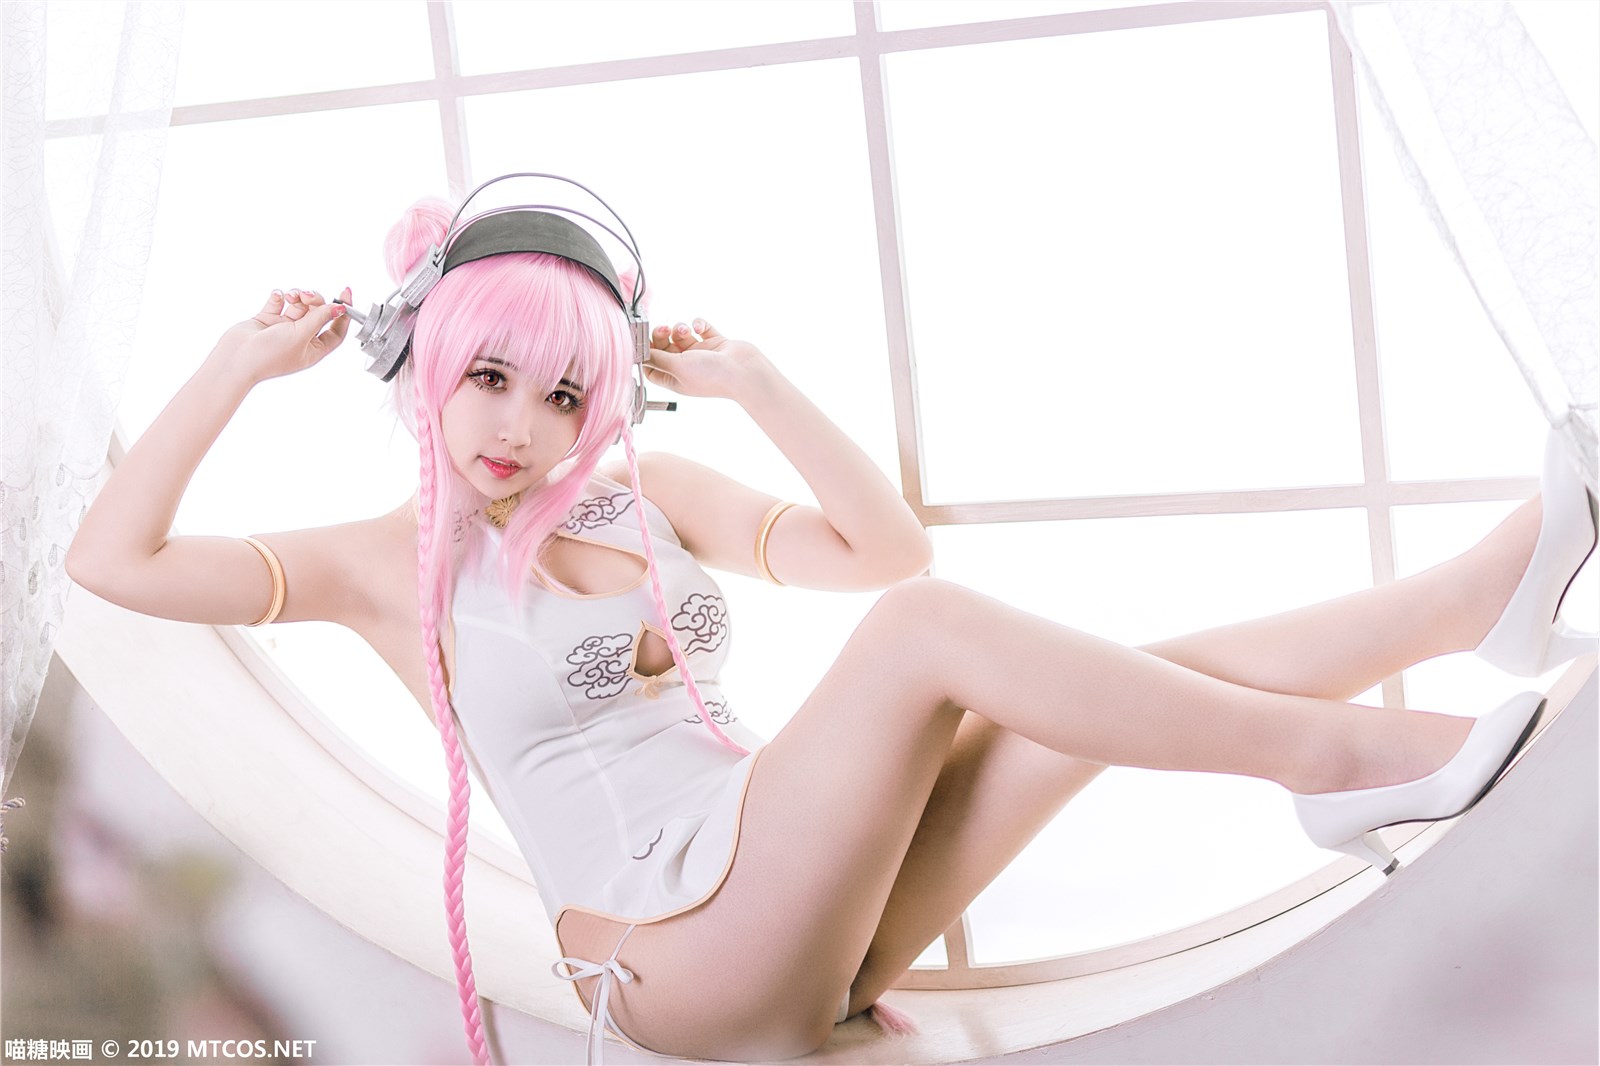 Meow sugar reflects the passion of Sony in Vol.050(11)